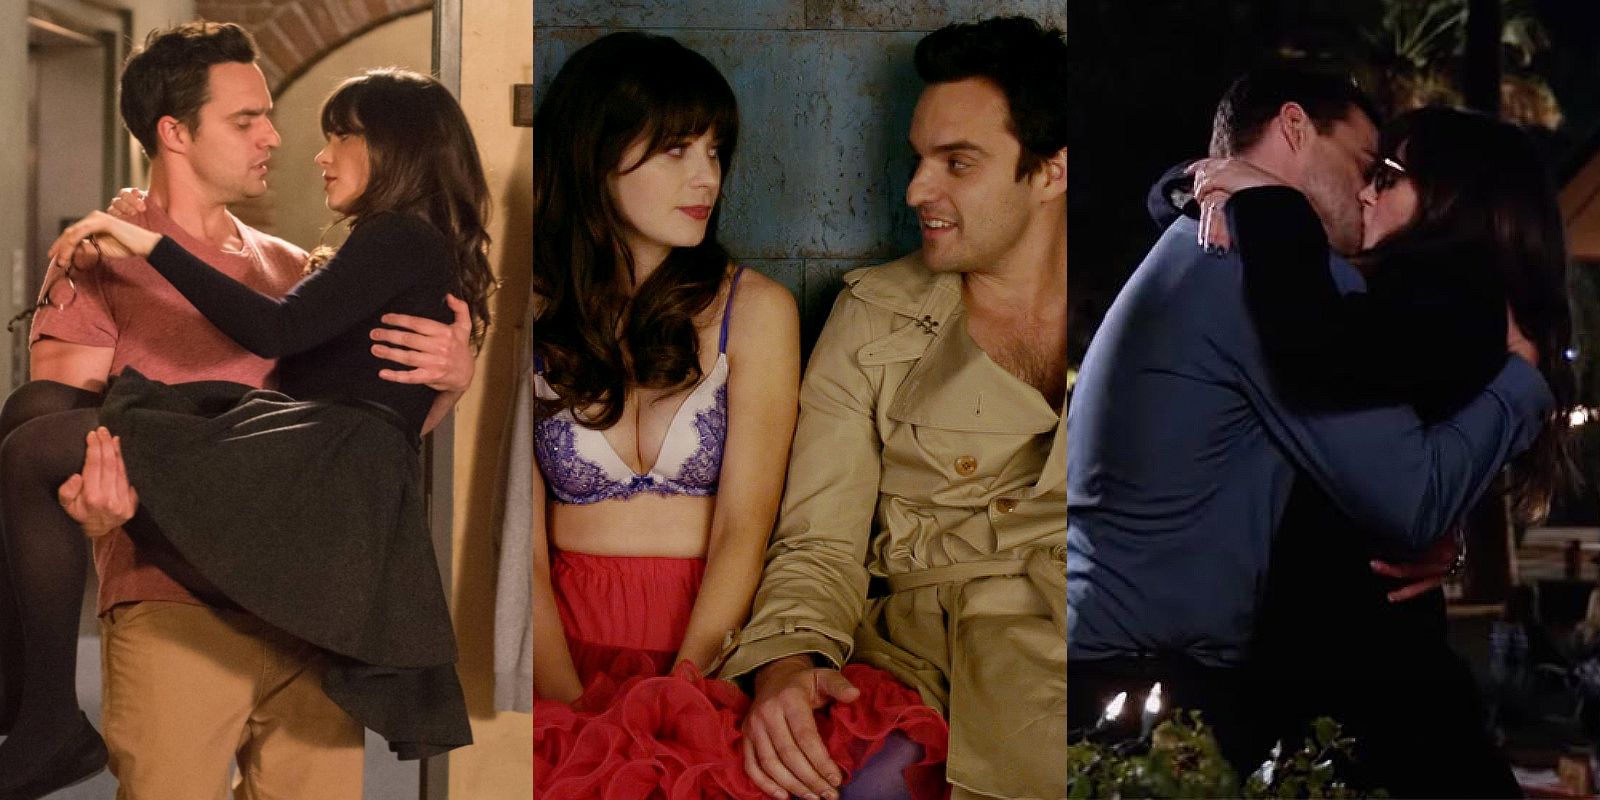 Split image of New Girl's Nick carrying Jess, the two of them sitting together, and Nick and Jess kissing